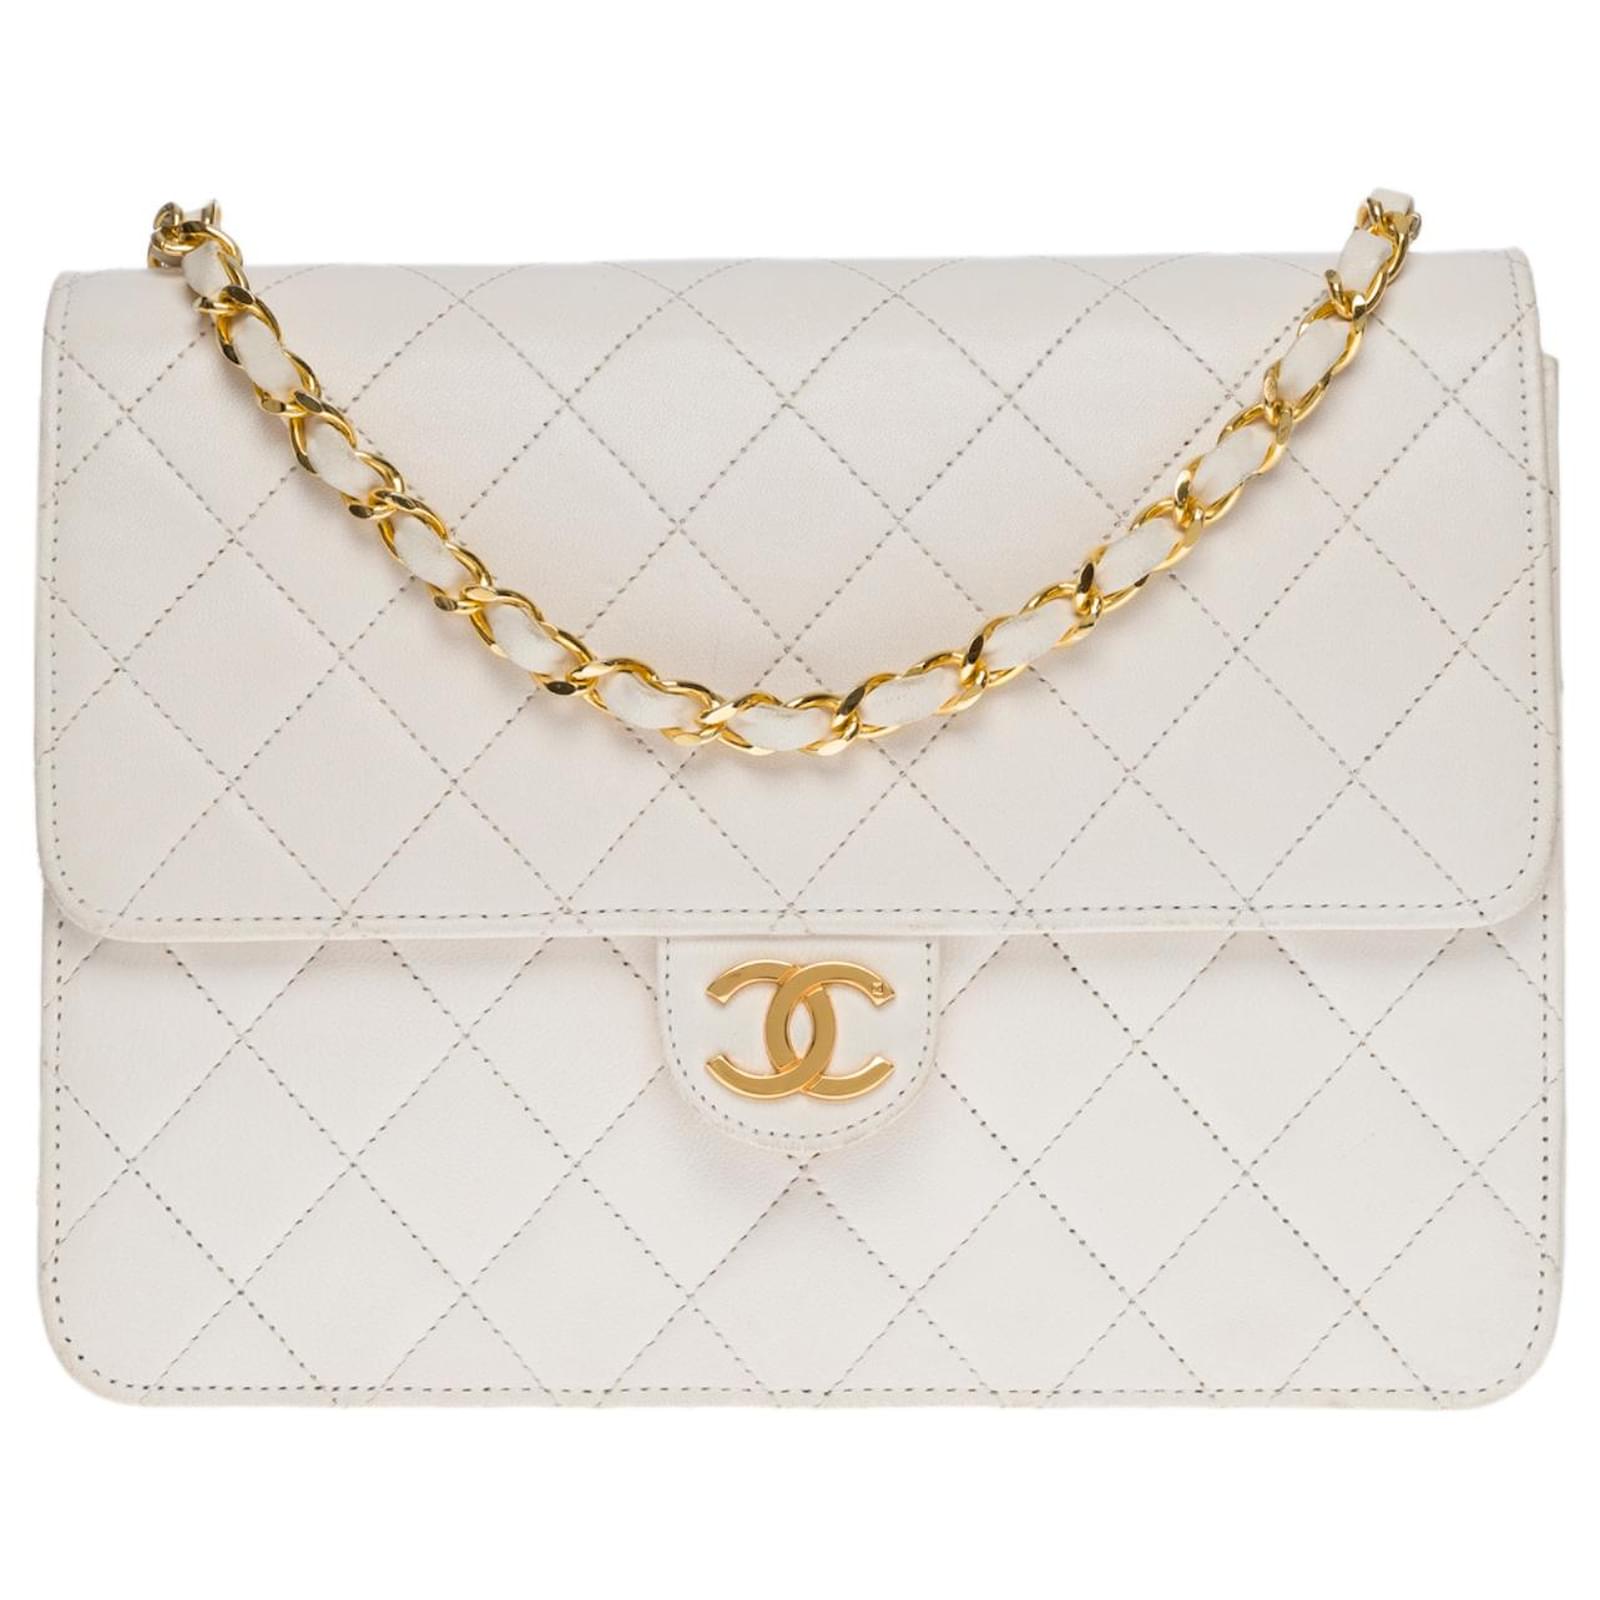 Timeless Very beautiful Chanel Classic flap bag handbag in white